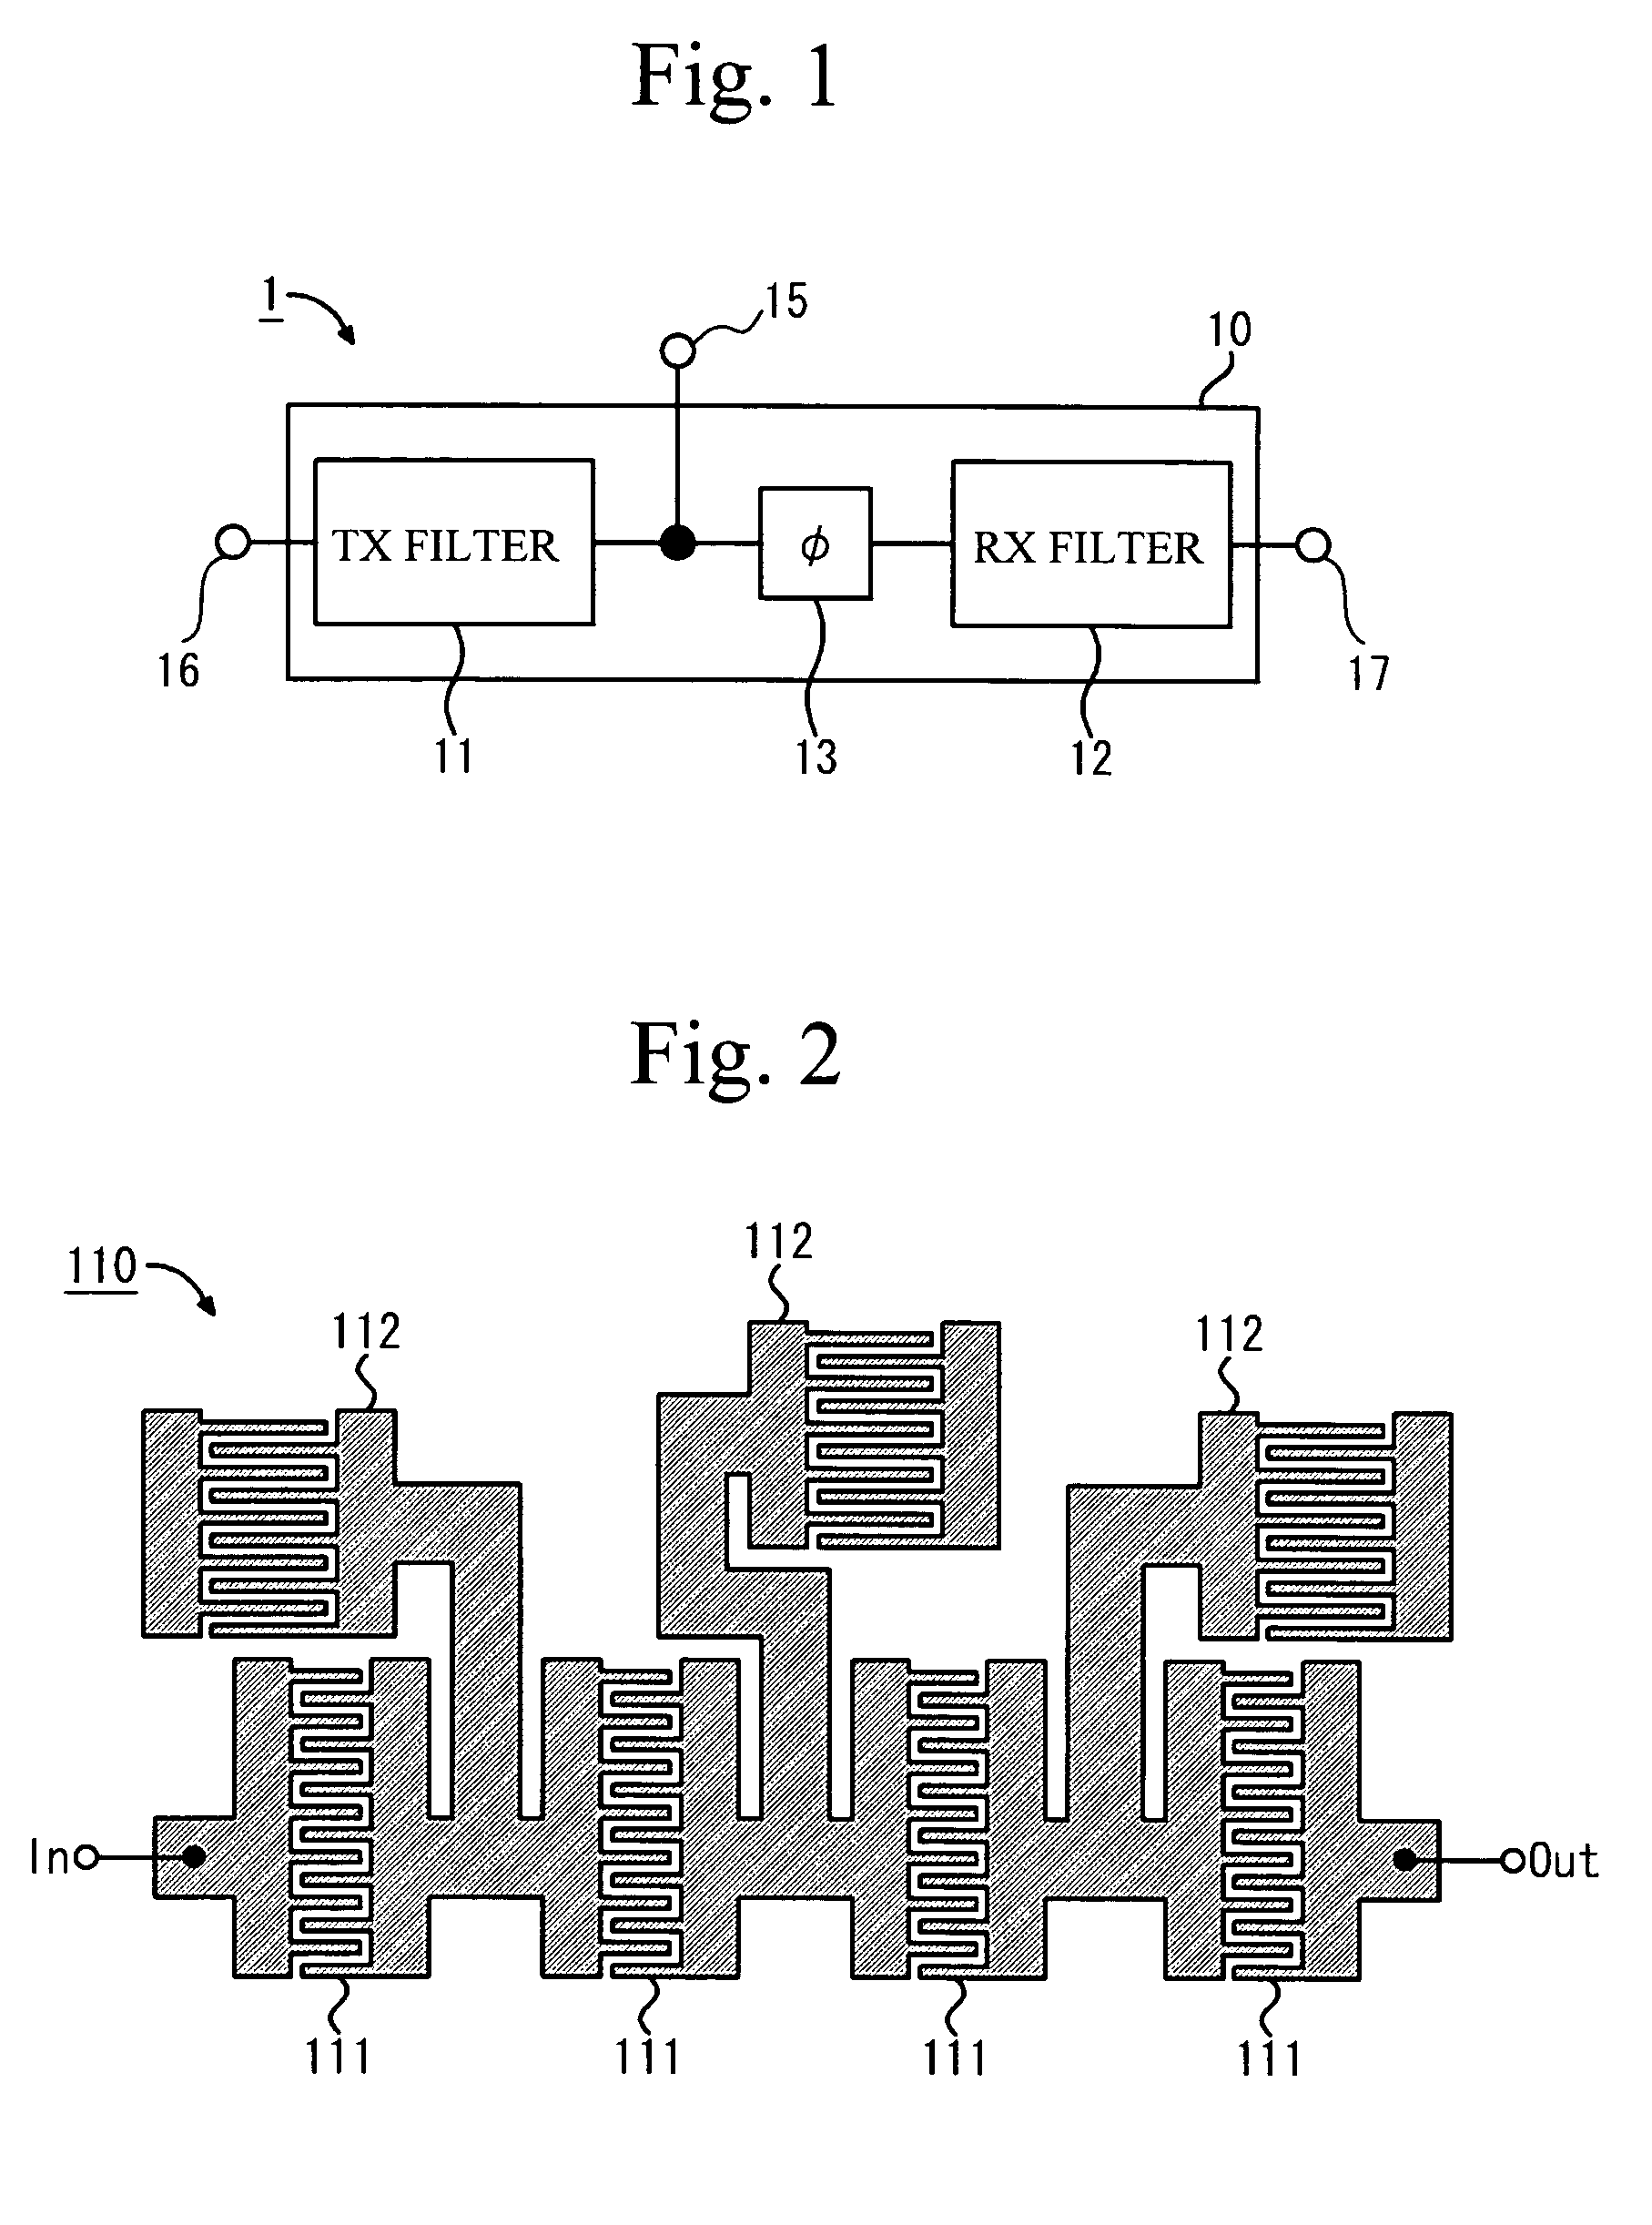 Duplexer having two surface acoustic wave filters on one substrate